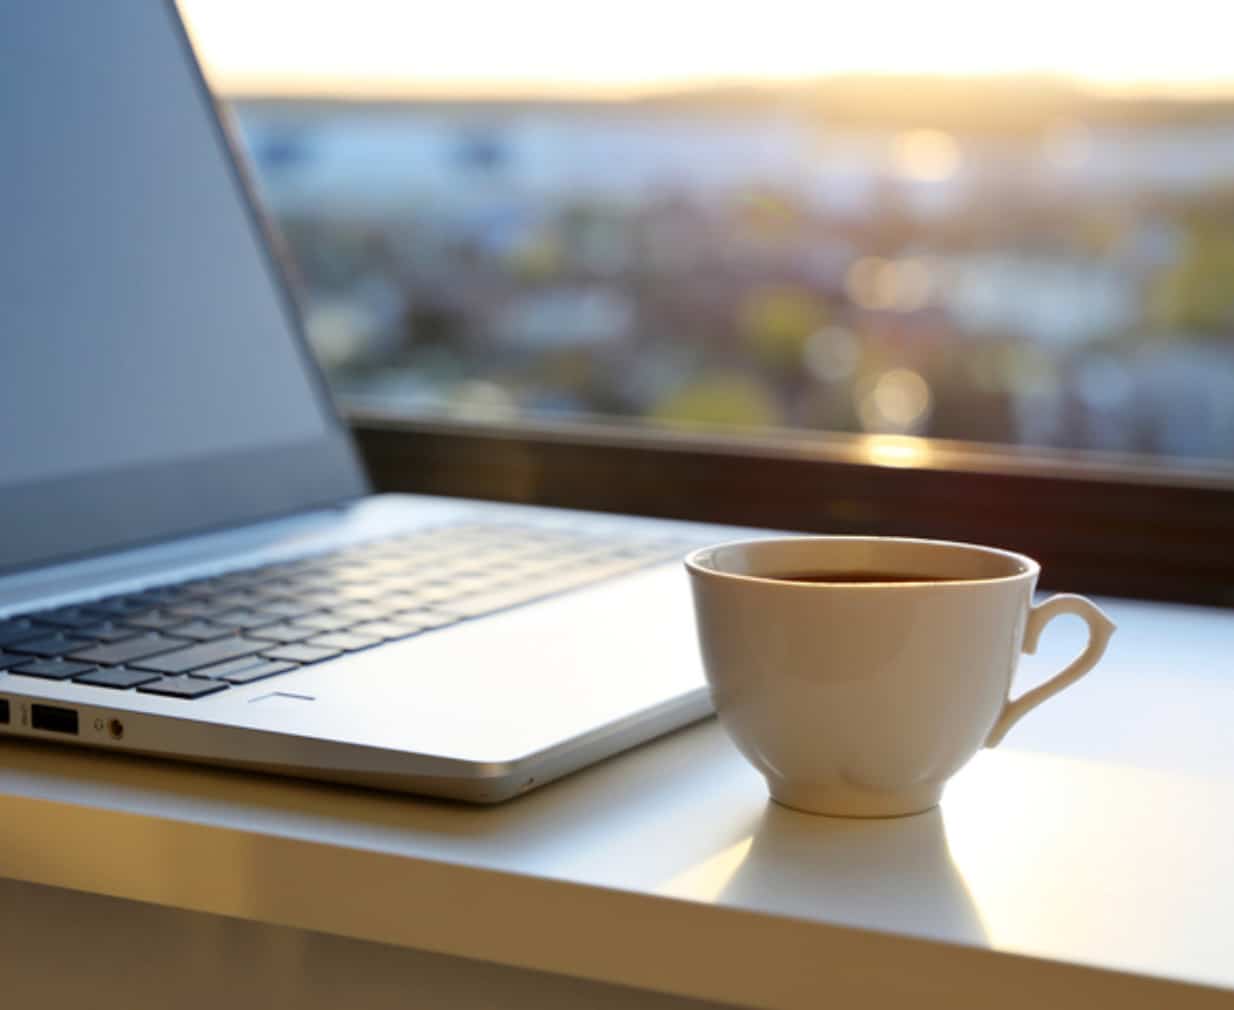 Coffe cup and laptop on desk at sunrise